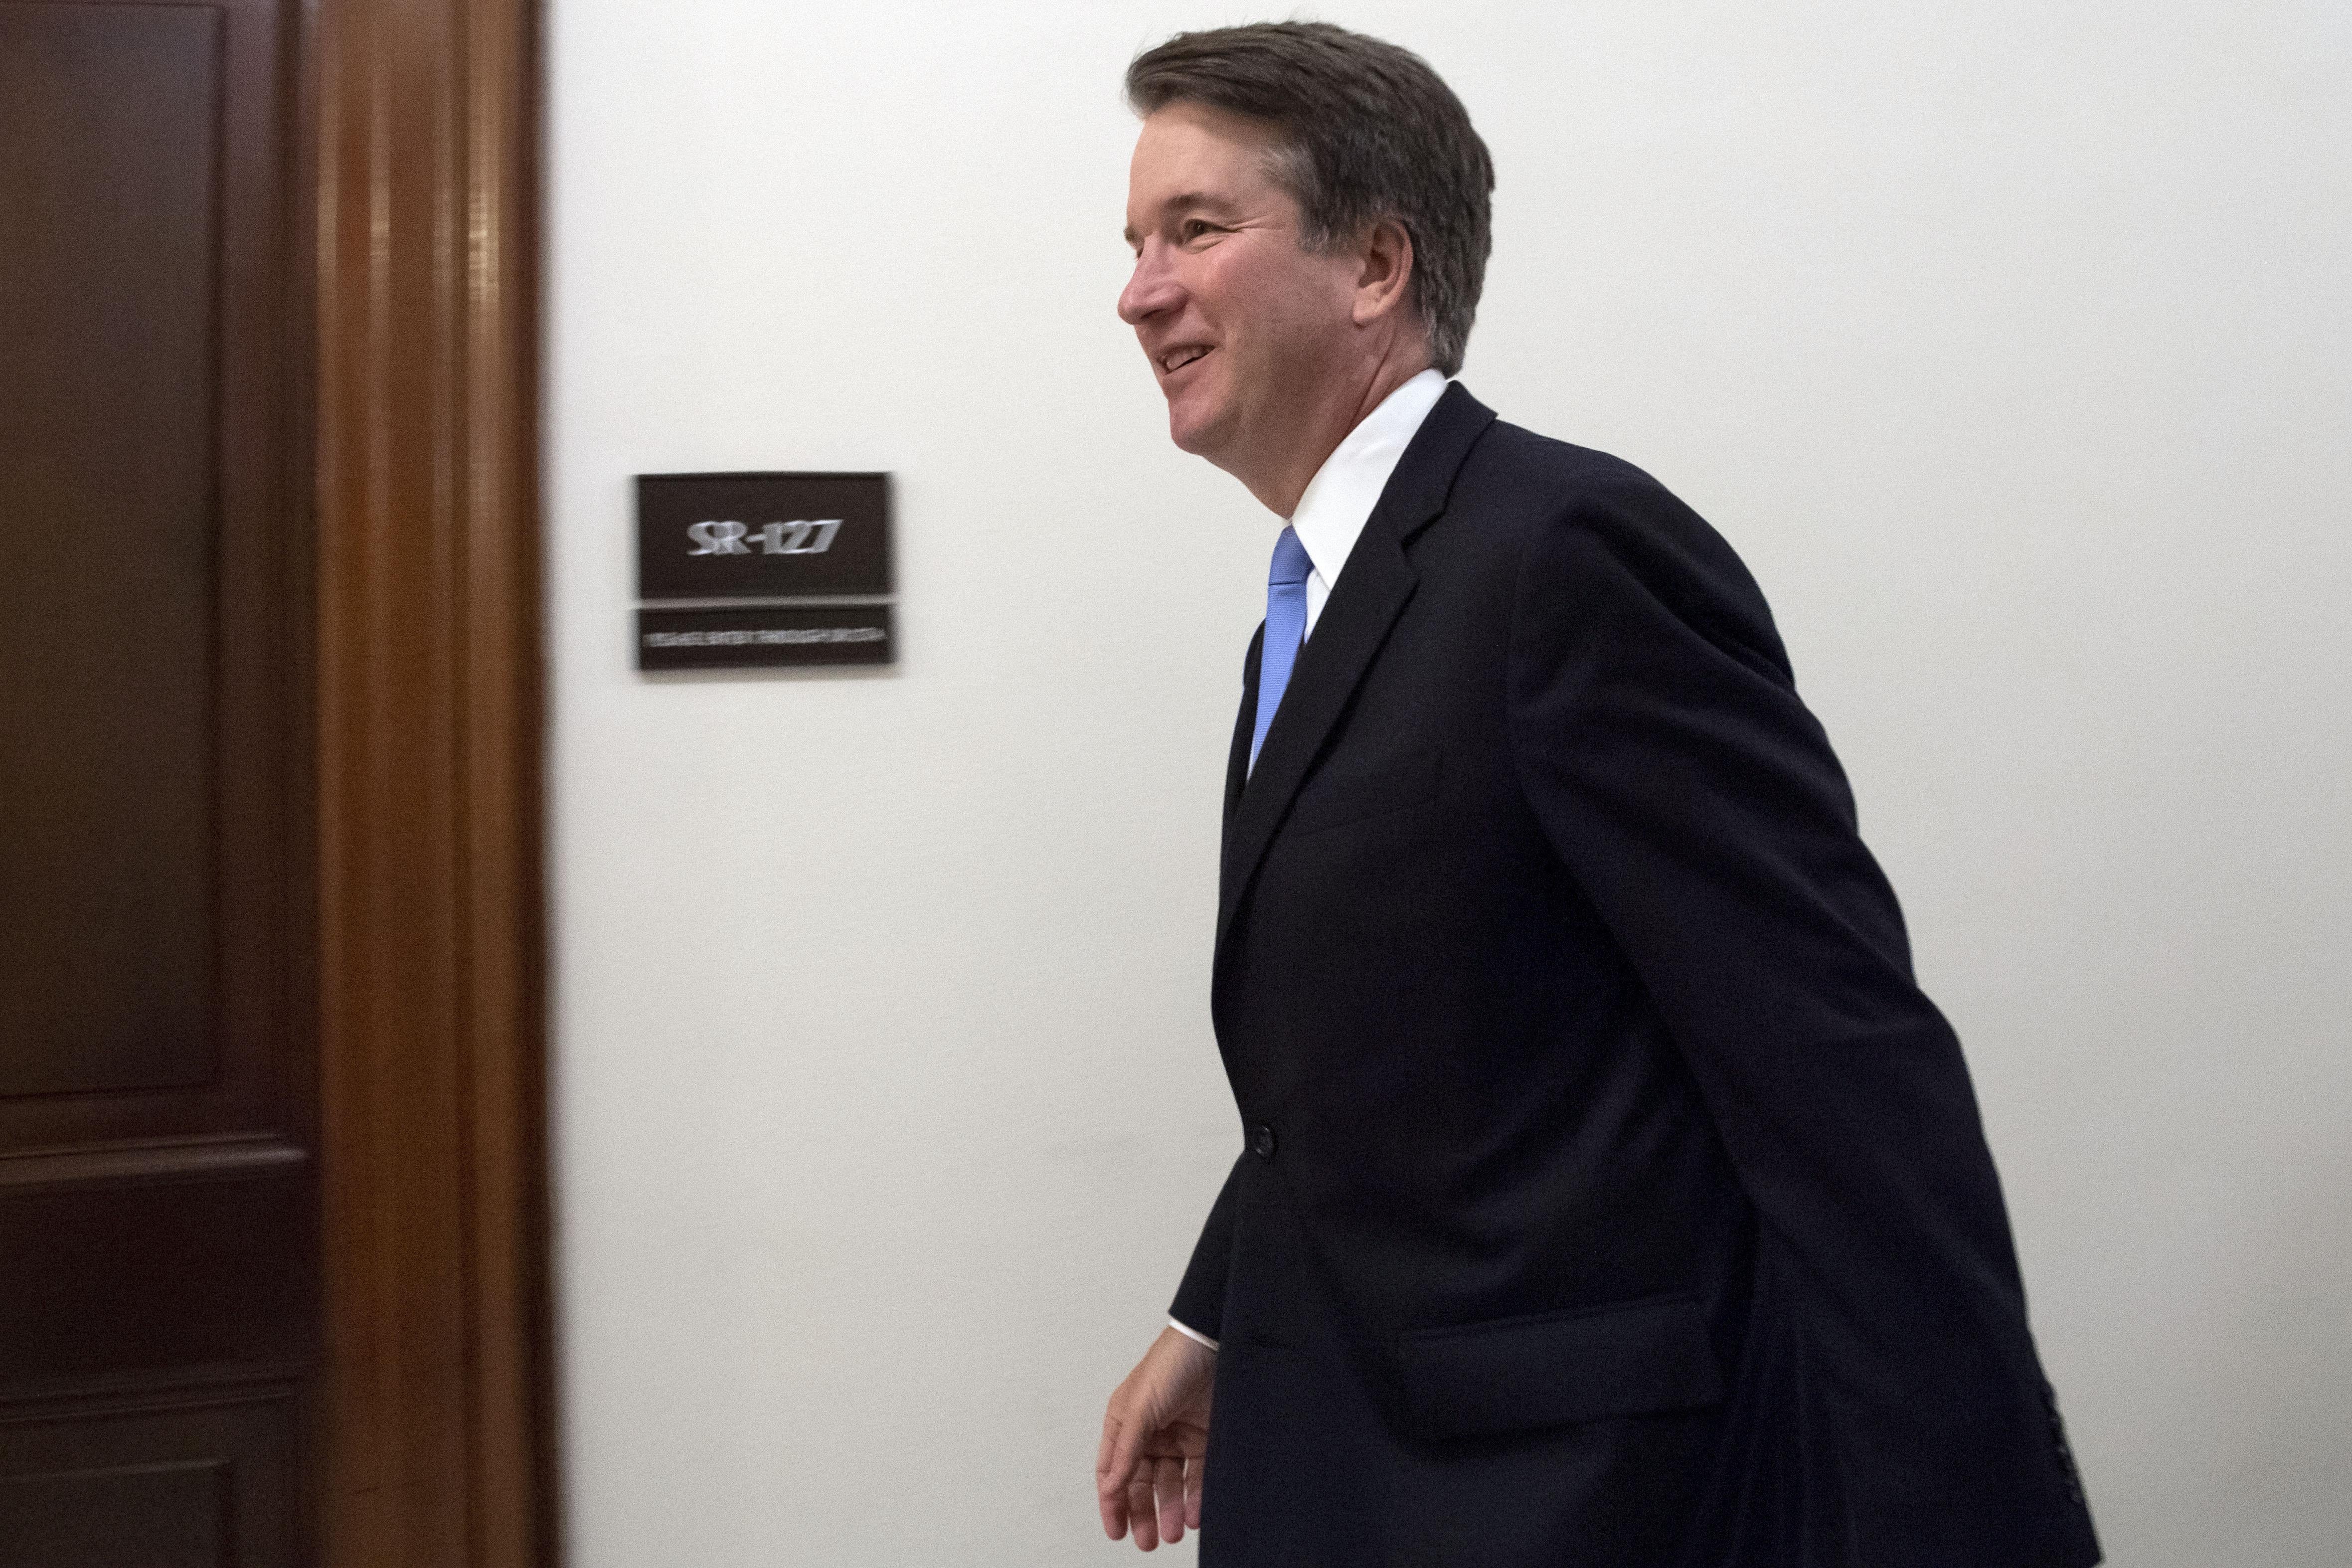 Supreme Court associate justice nominee Brett Kavanaugh arrives for a meeting with Senator Chris Coons, Democrat of Delaware, on Capitol Hill in Washington, D.C. on August 23, 2018. 